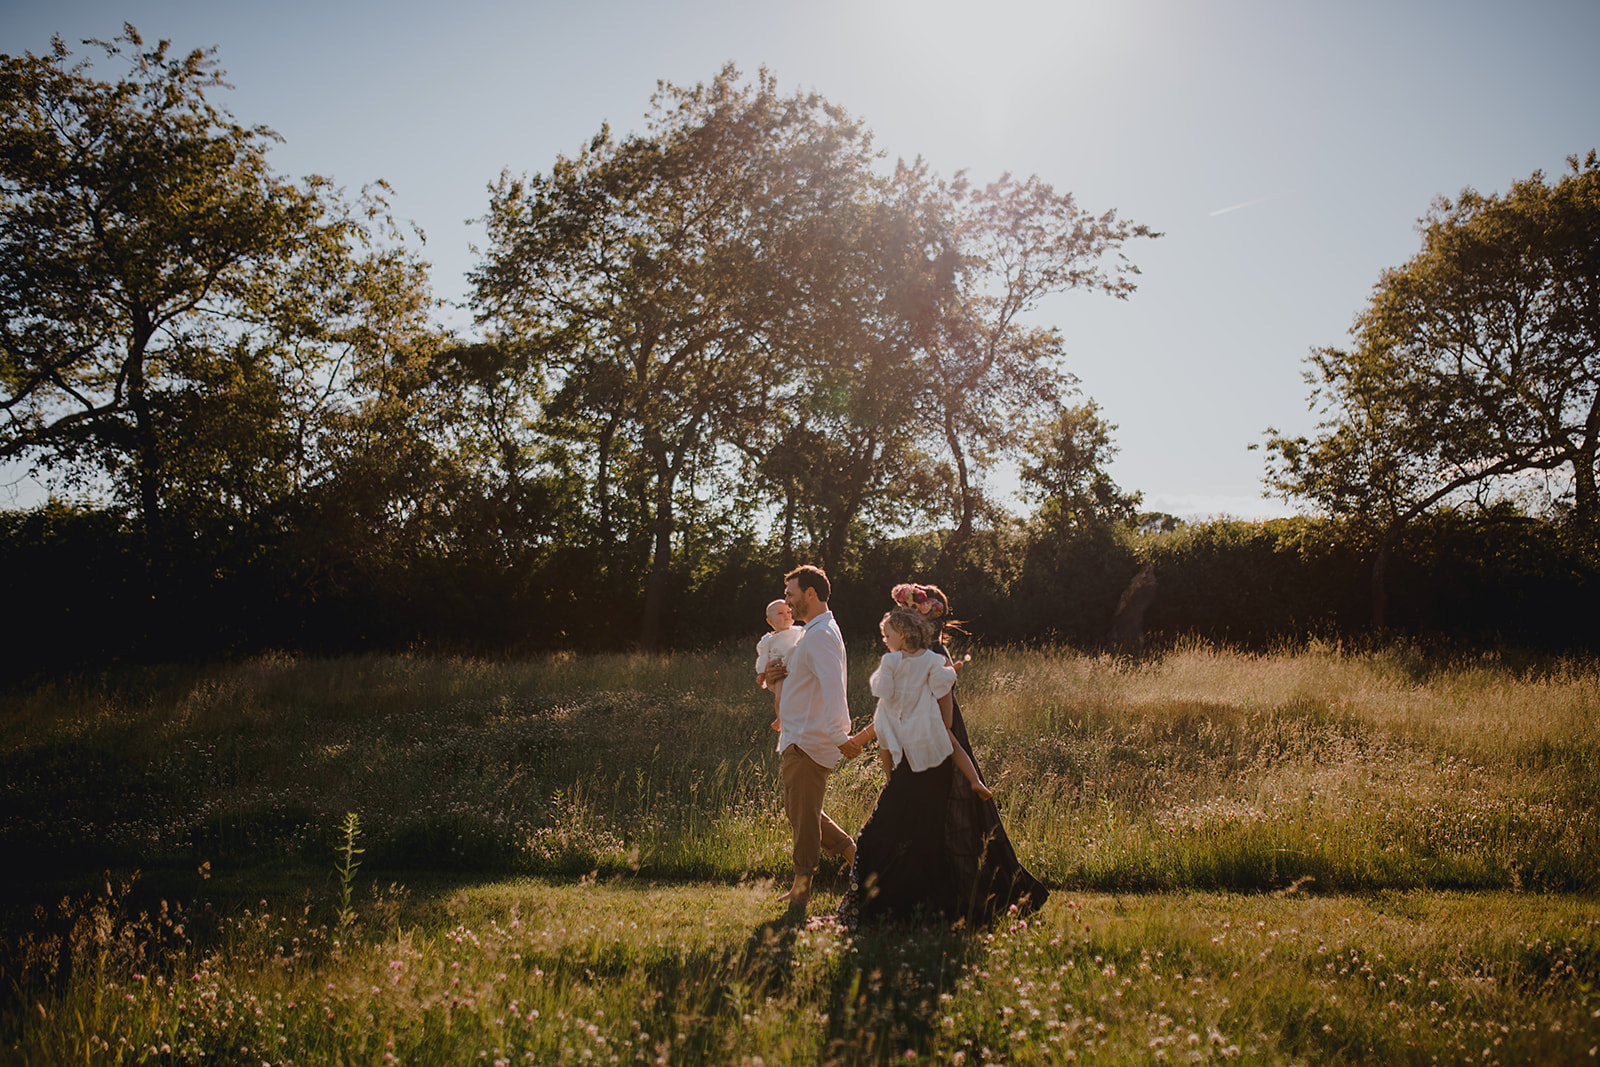 Bride and groom holding hands in a sun-kissed meadow with tall trees in the background